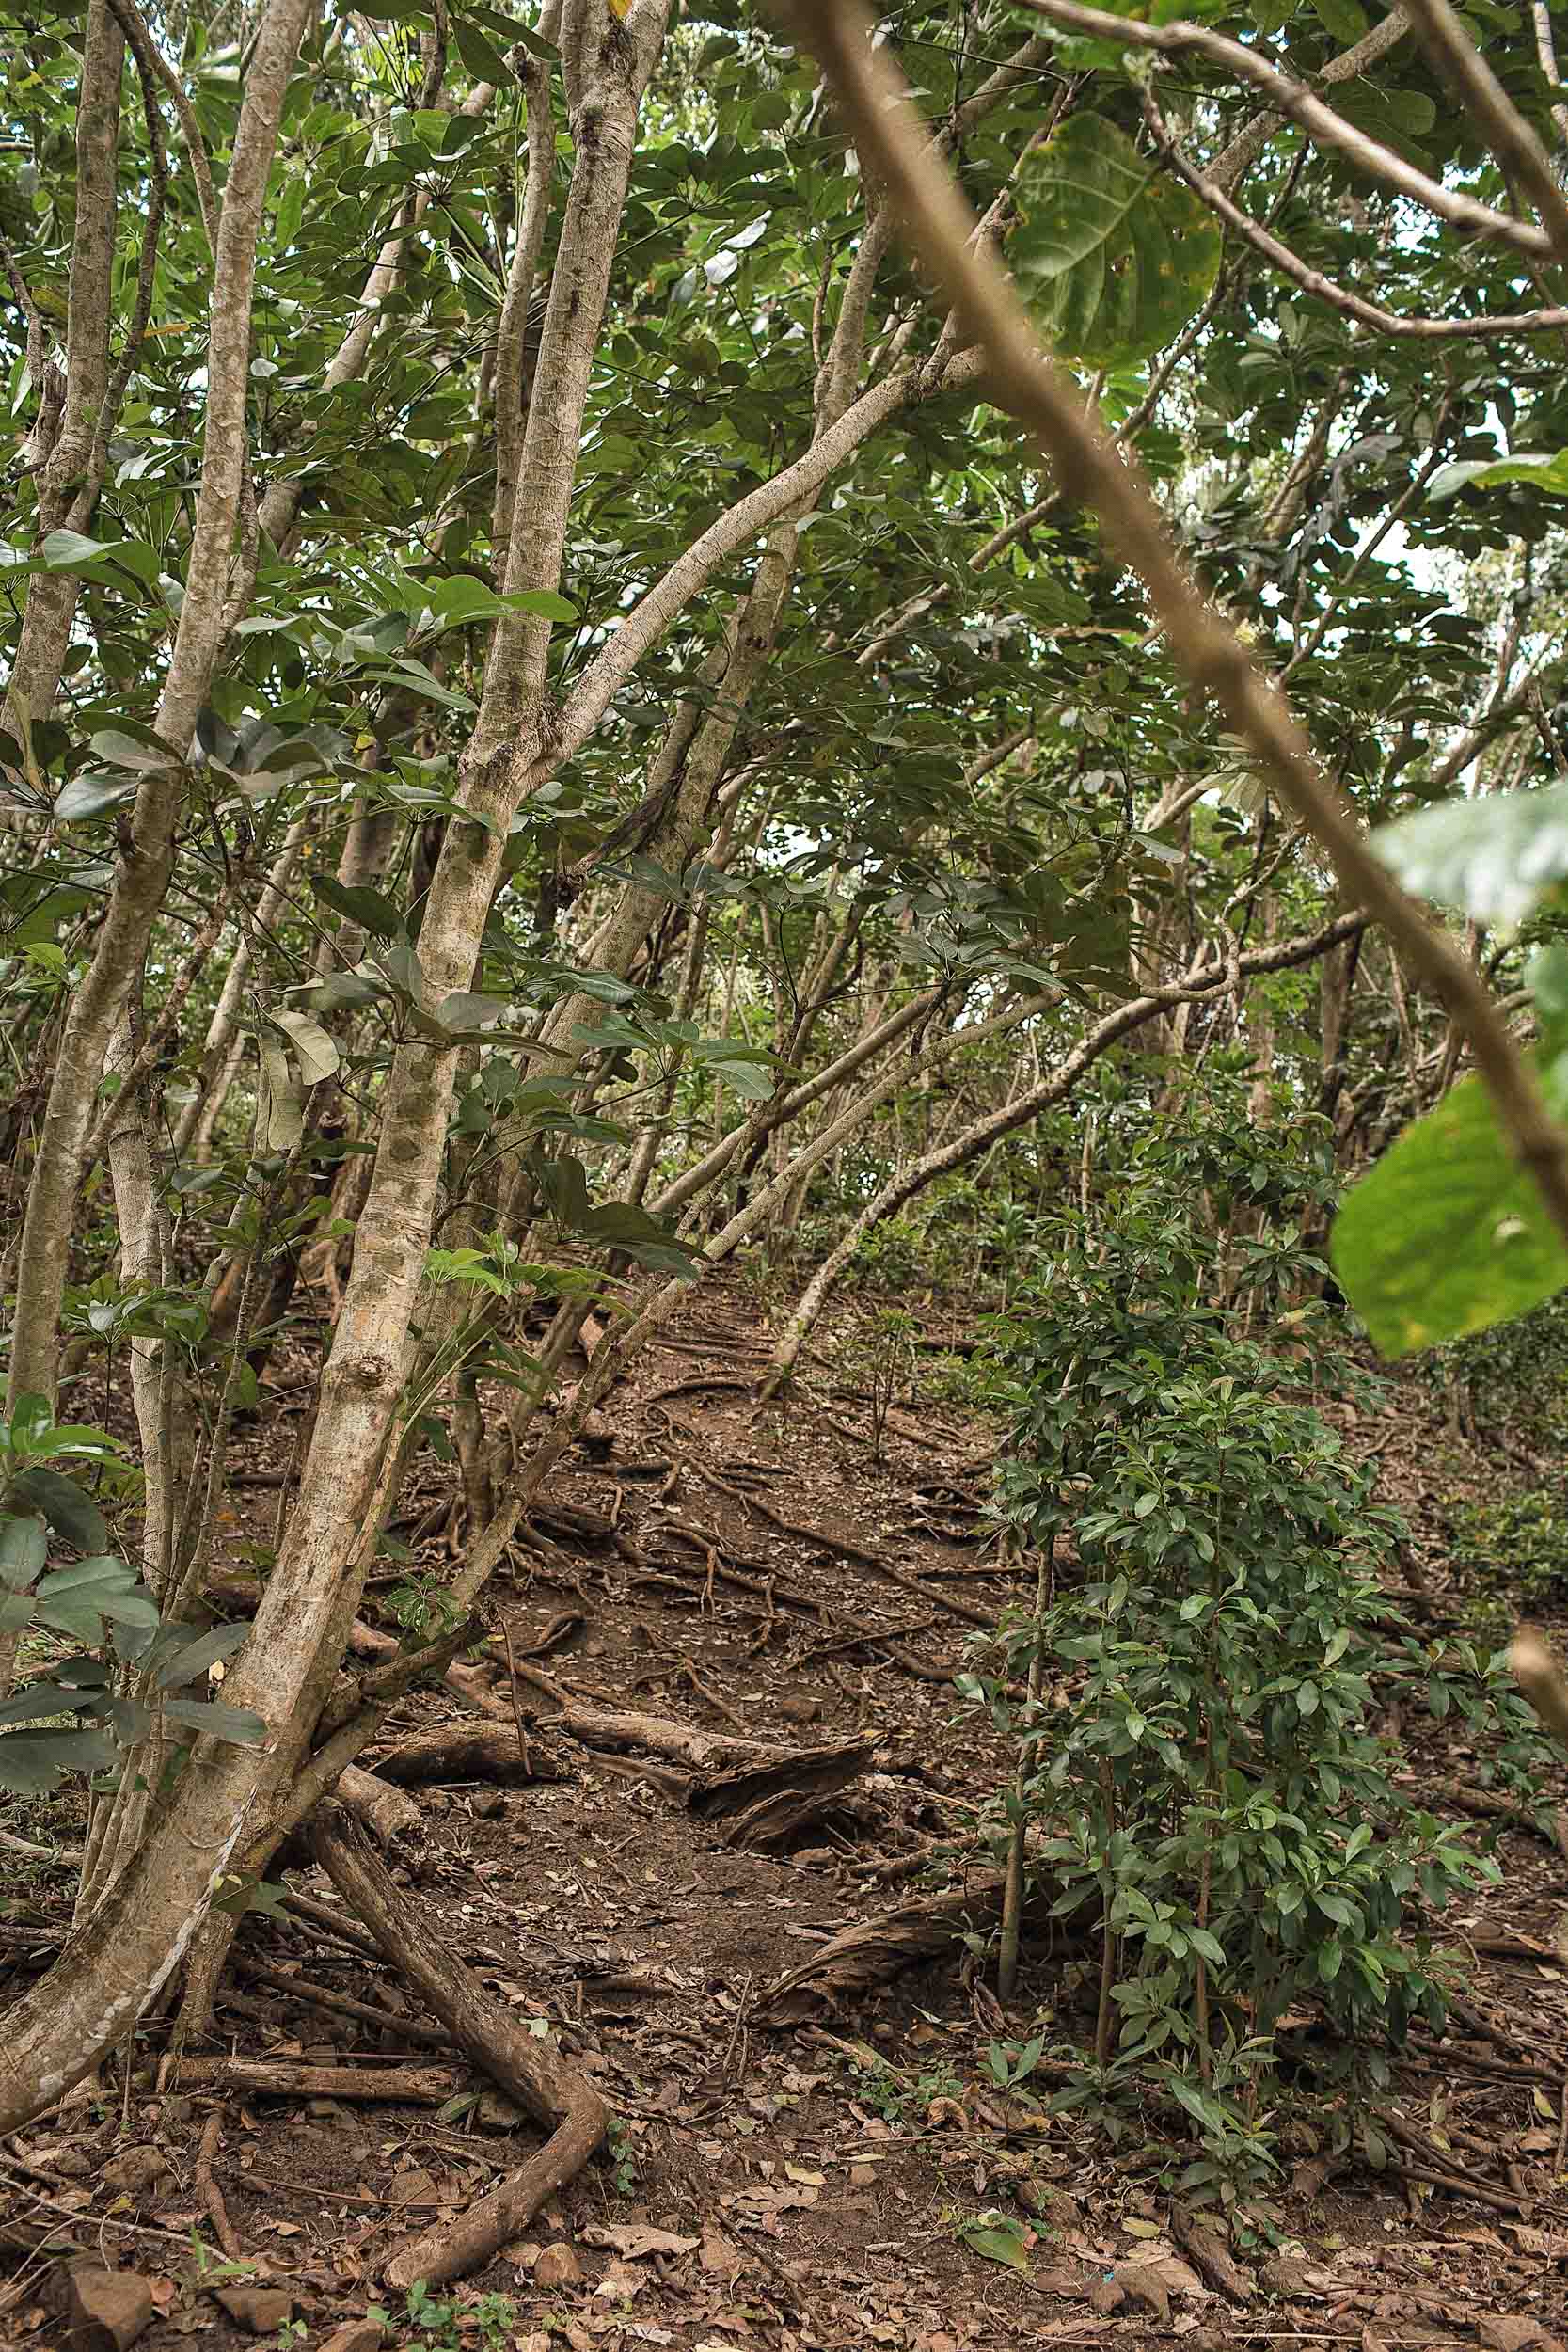 Steps made out of tree branches during the Crouching Lion Hike